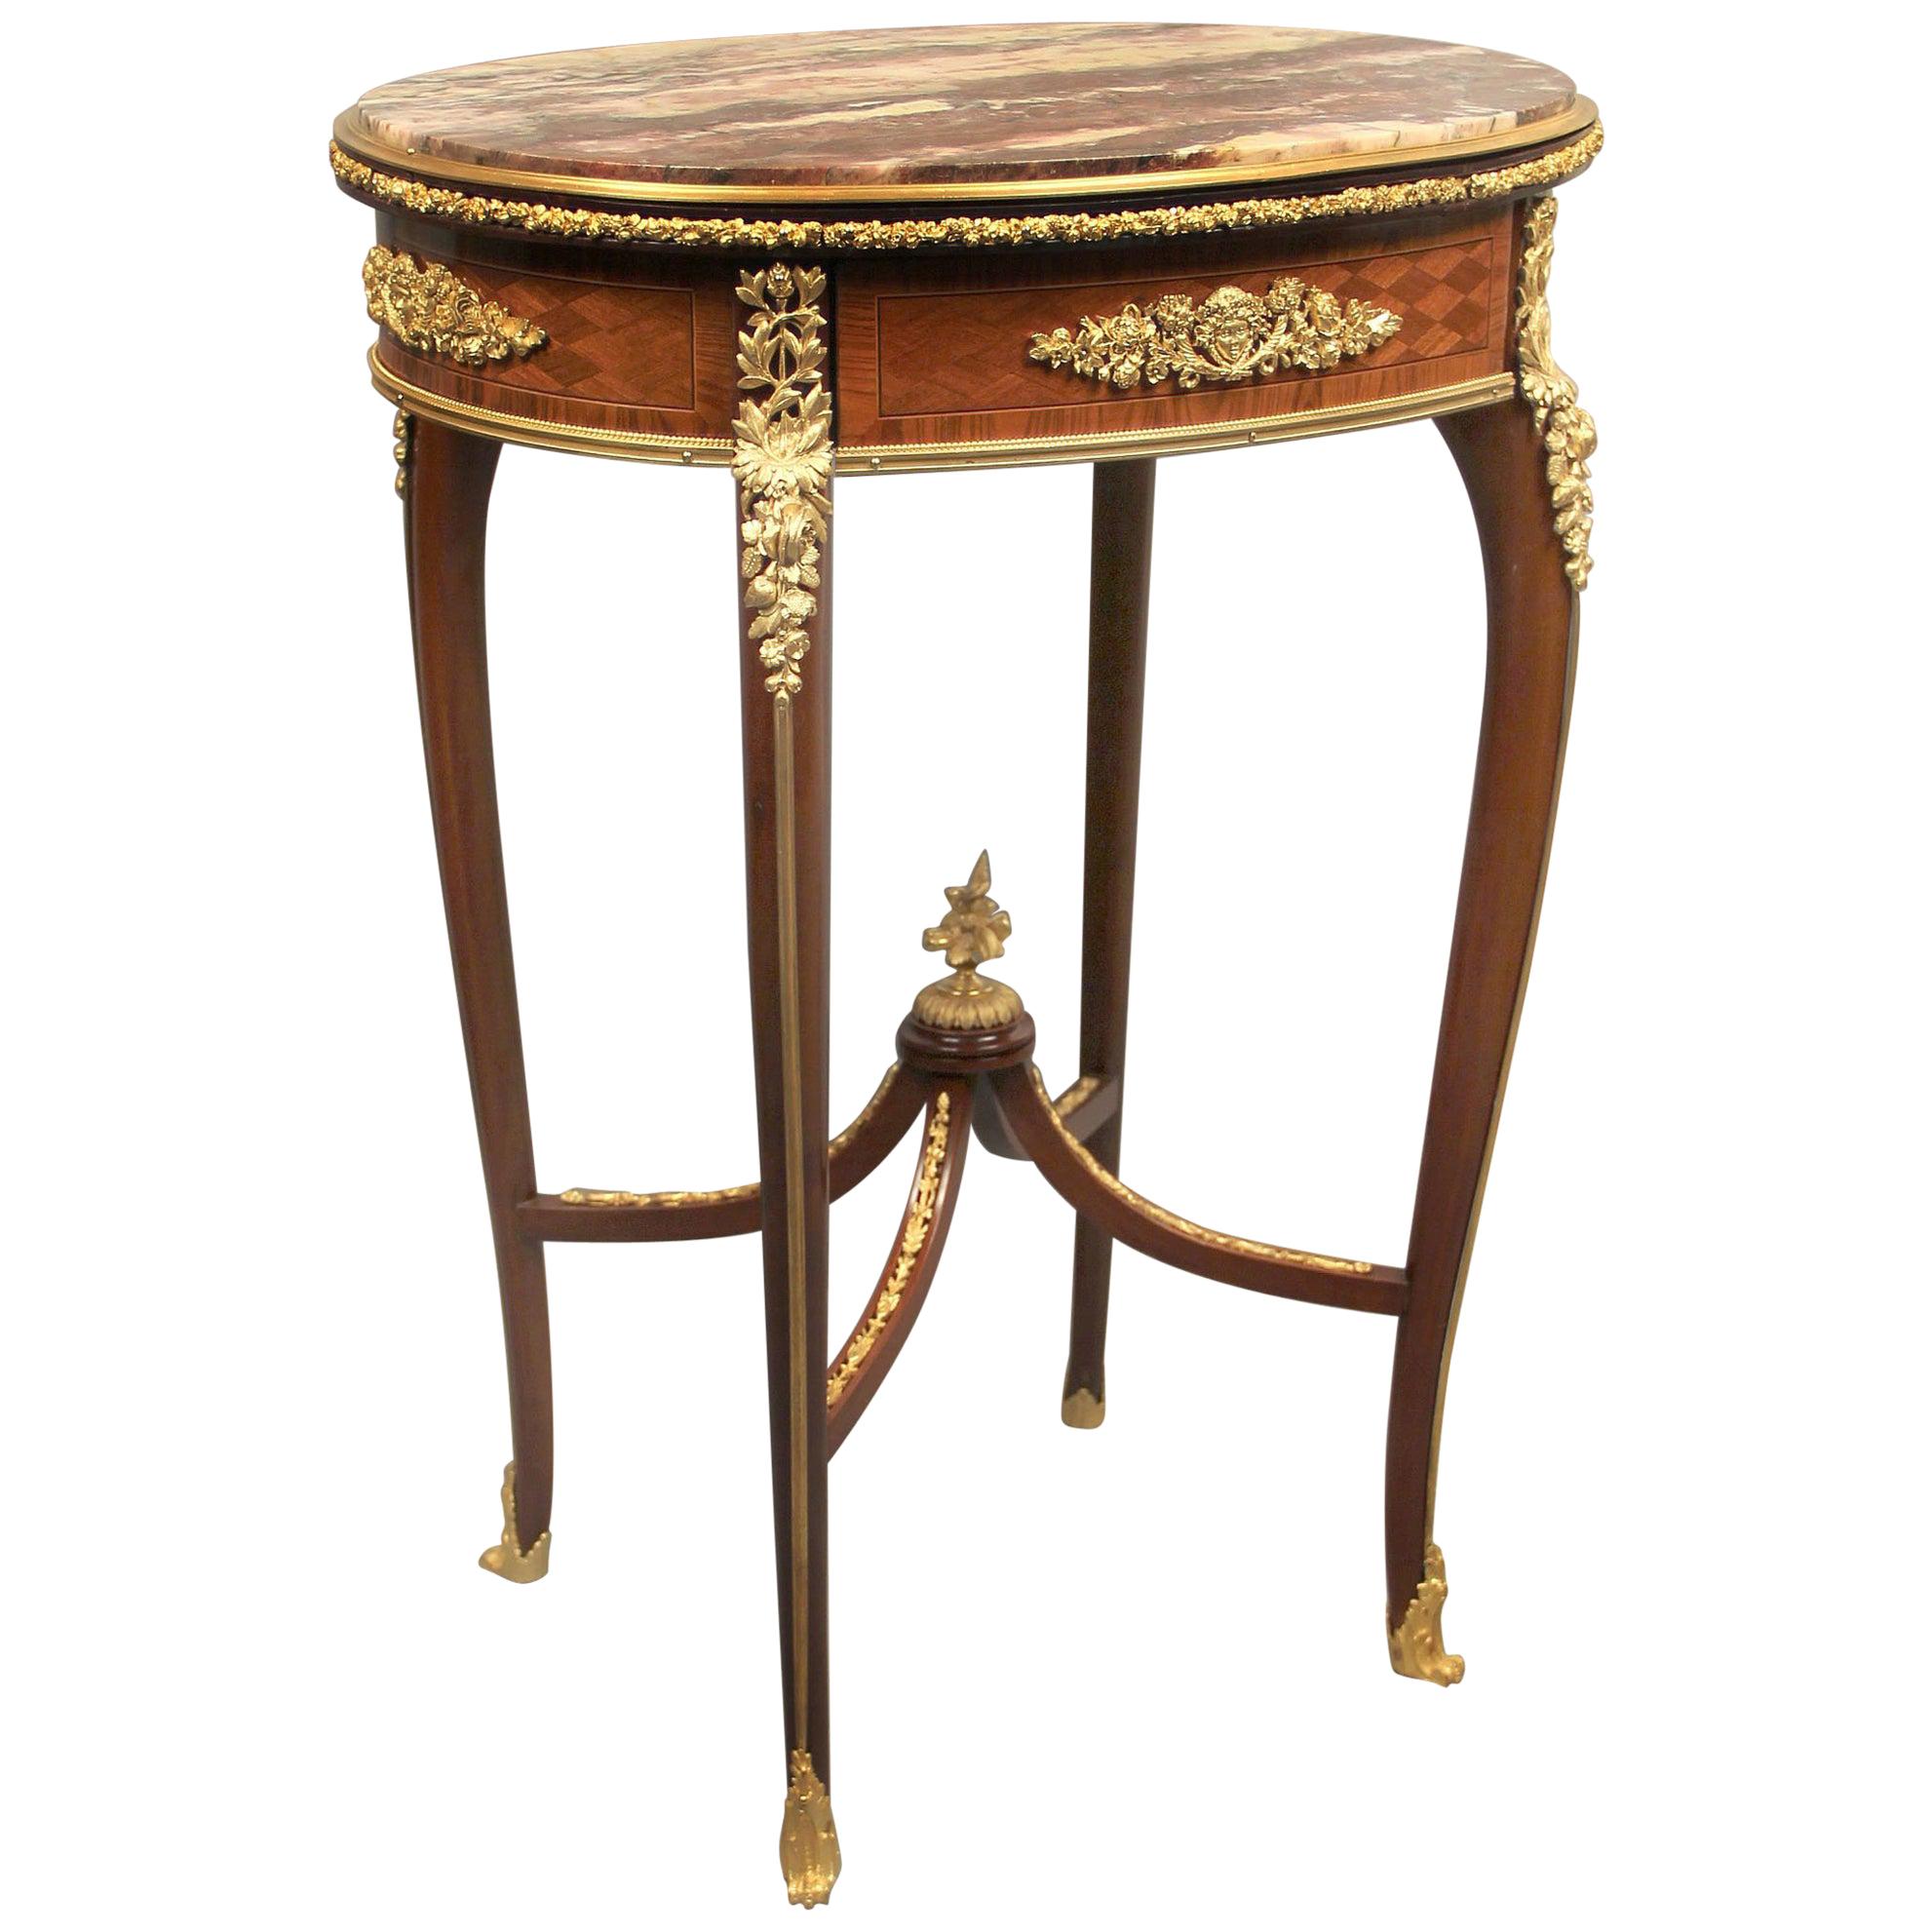 Fantastic Quality Late 19th Century Gilt Bronze-Mounted Lamp Table For Sale